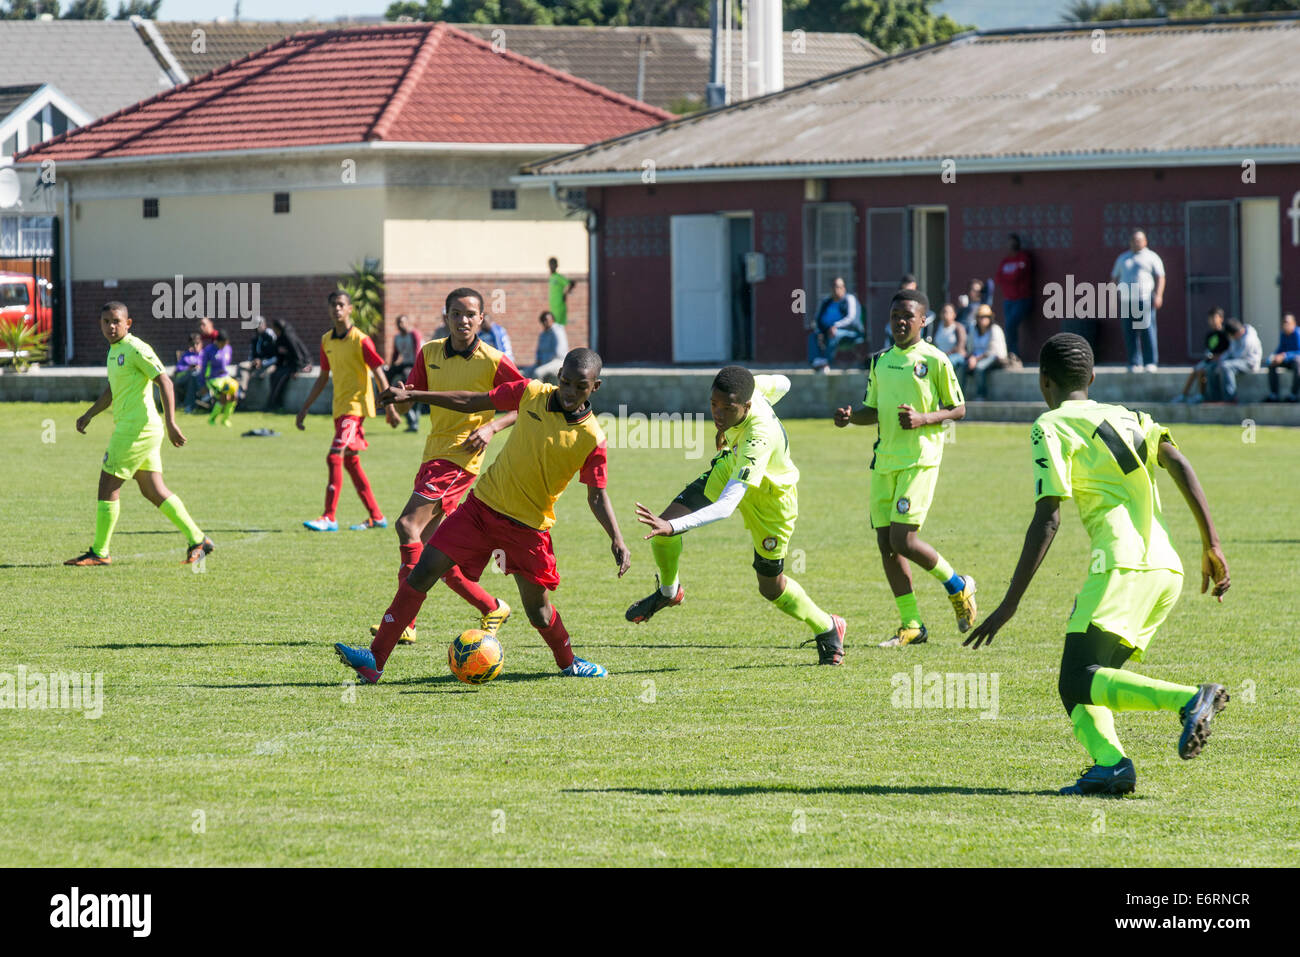 Football match of Under 15 youth teams, Cape Town, South Africa Stock Photo